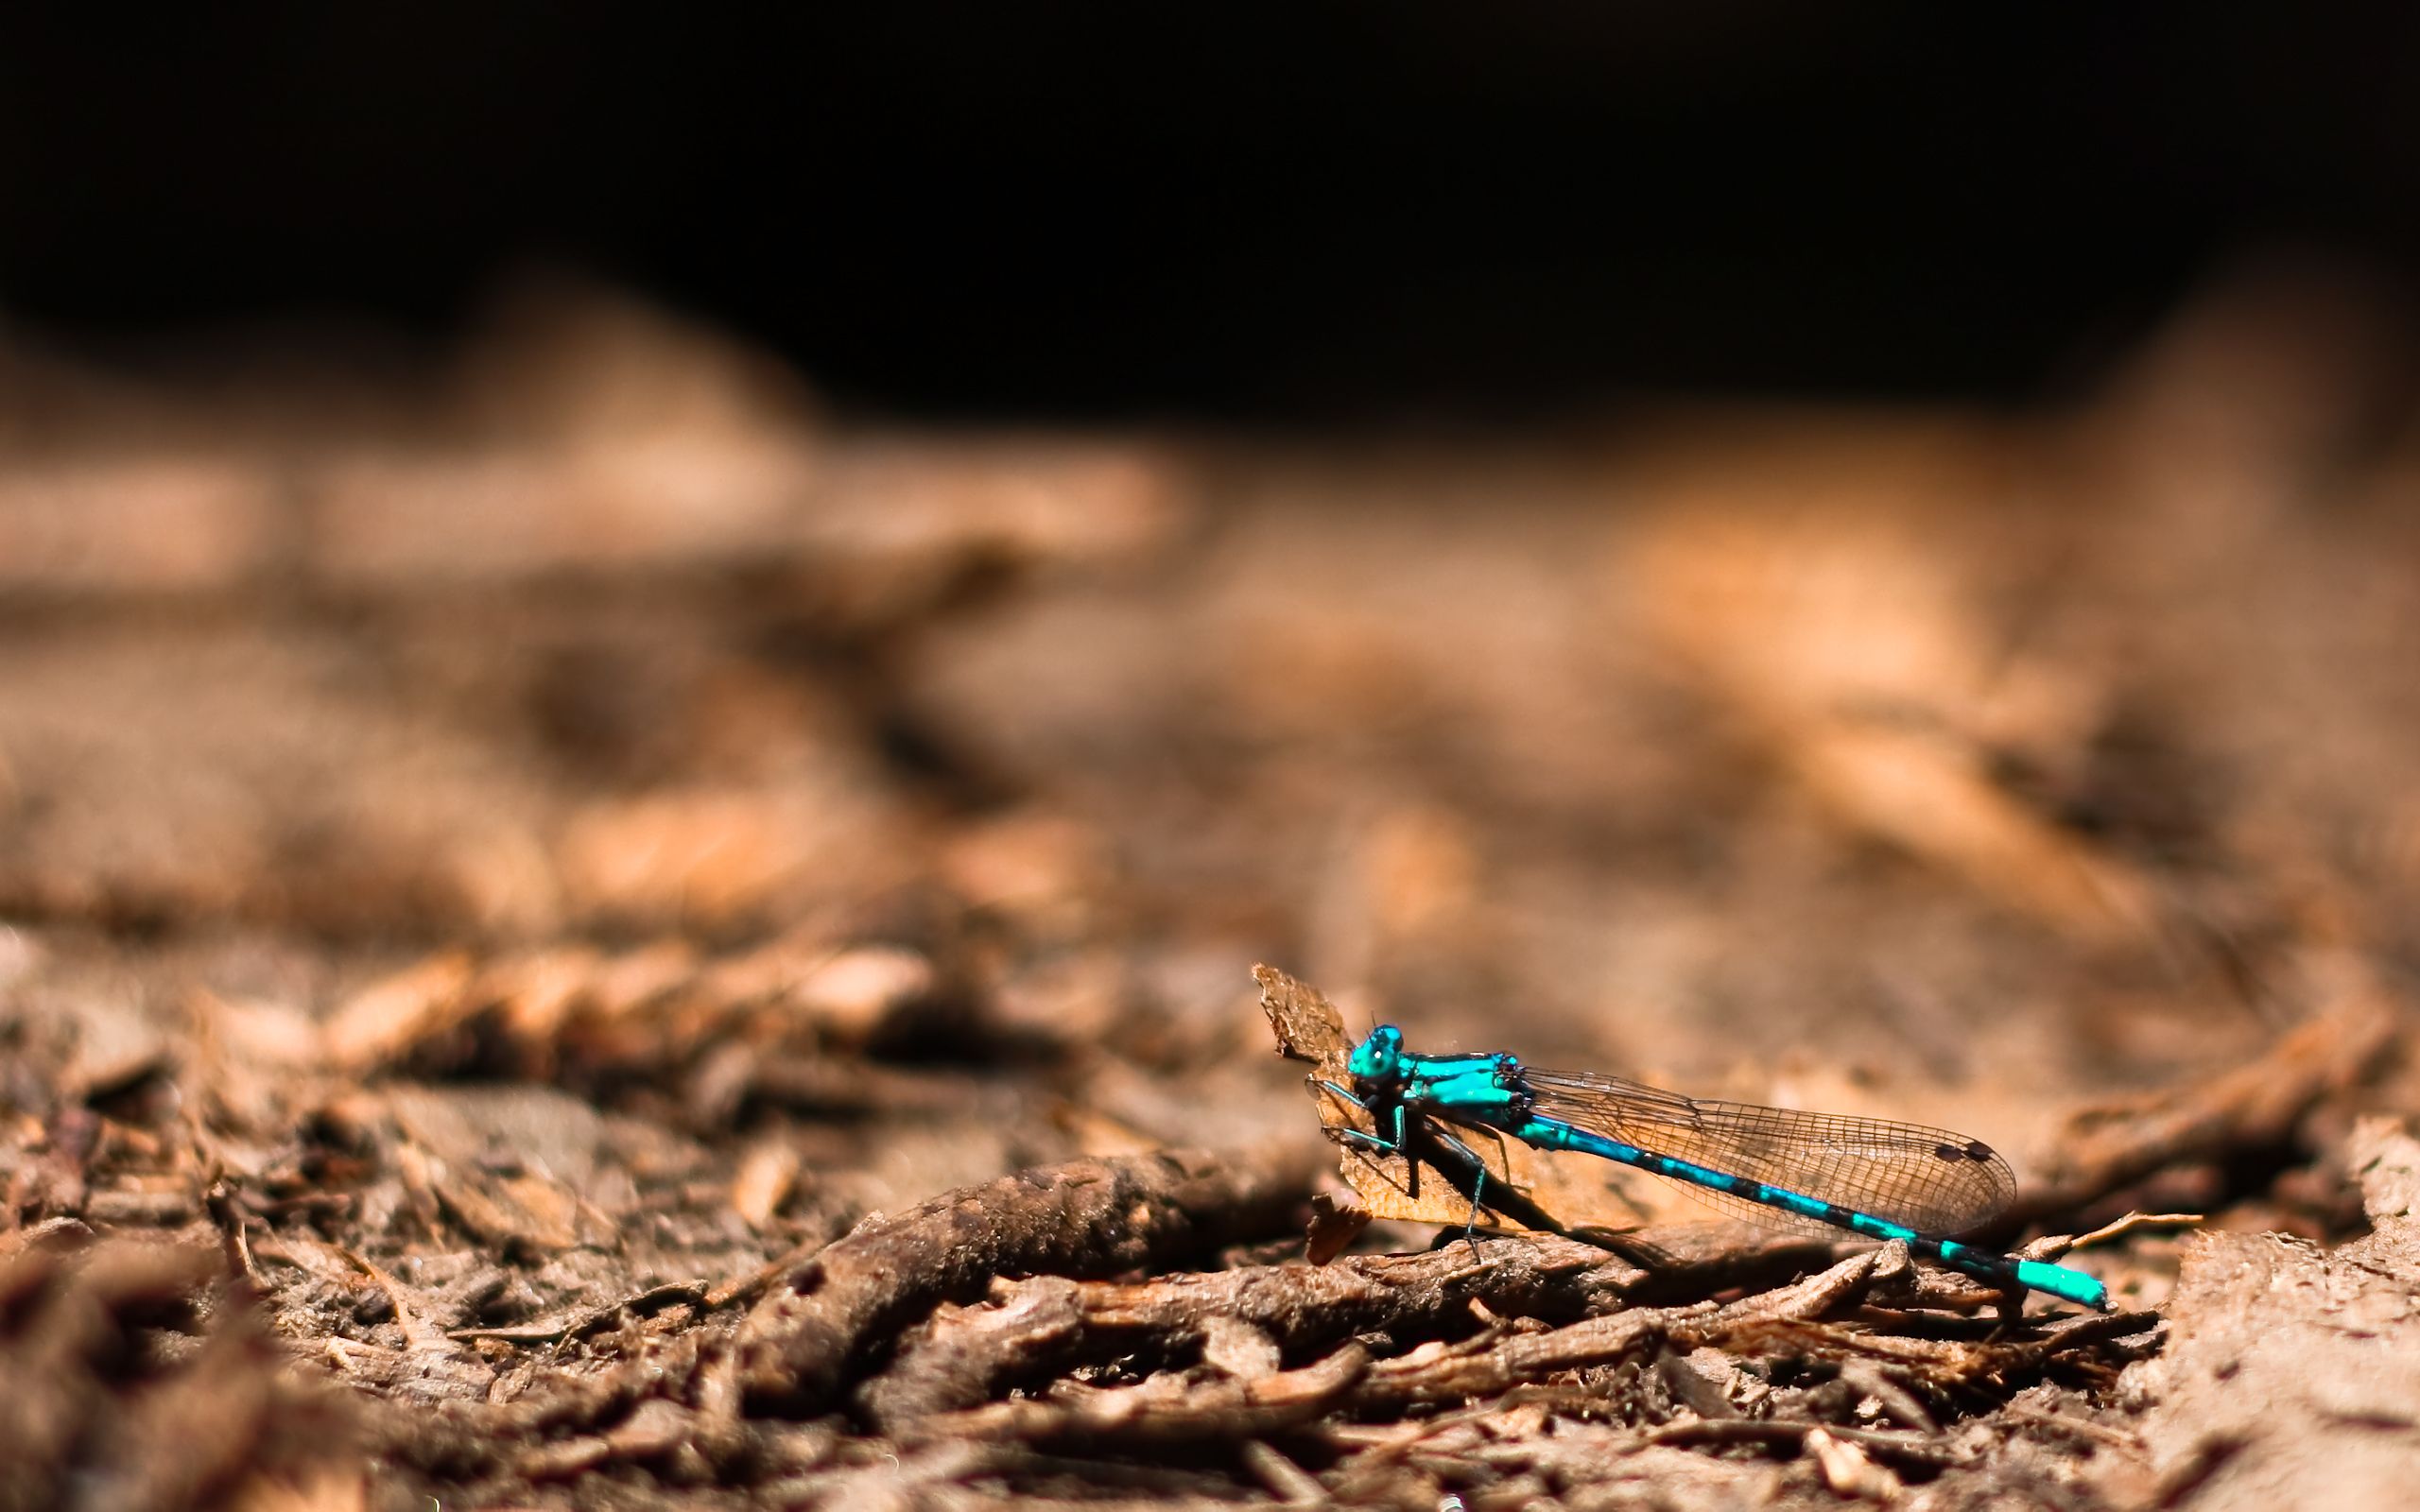 HD wallpaper, Dragonfly, Background